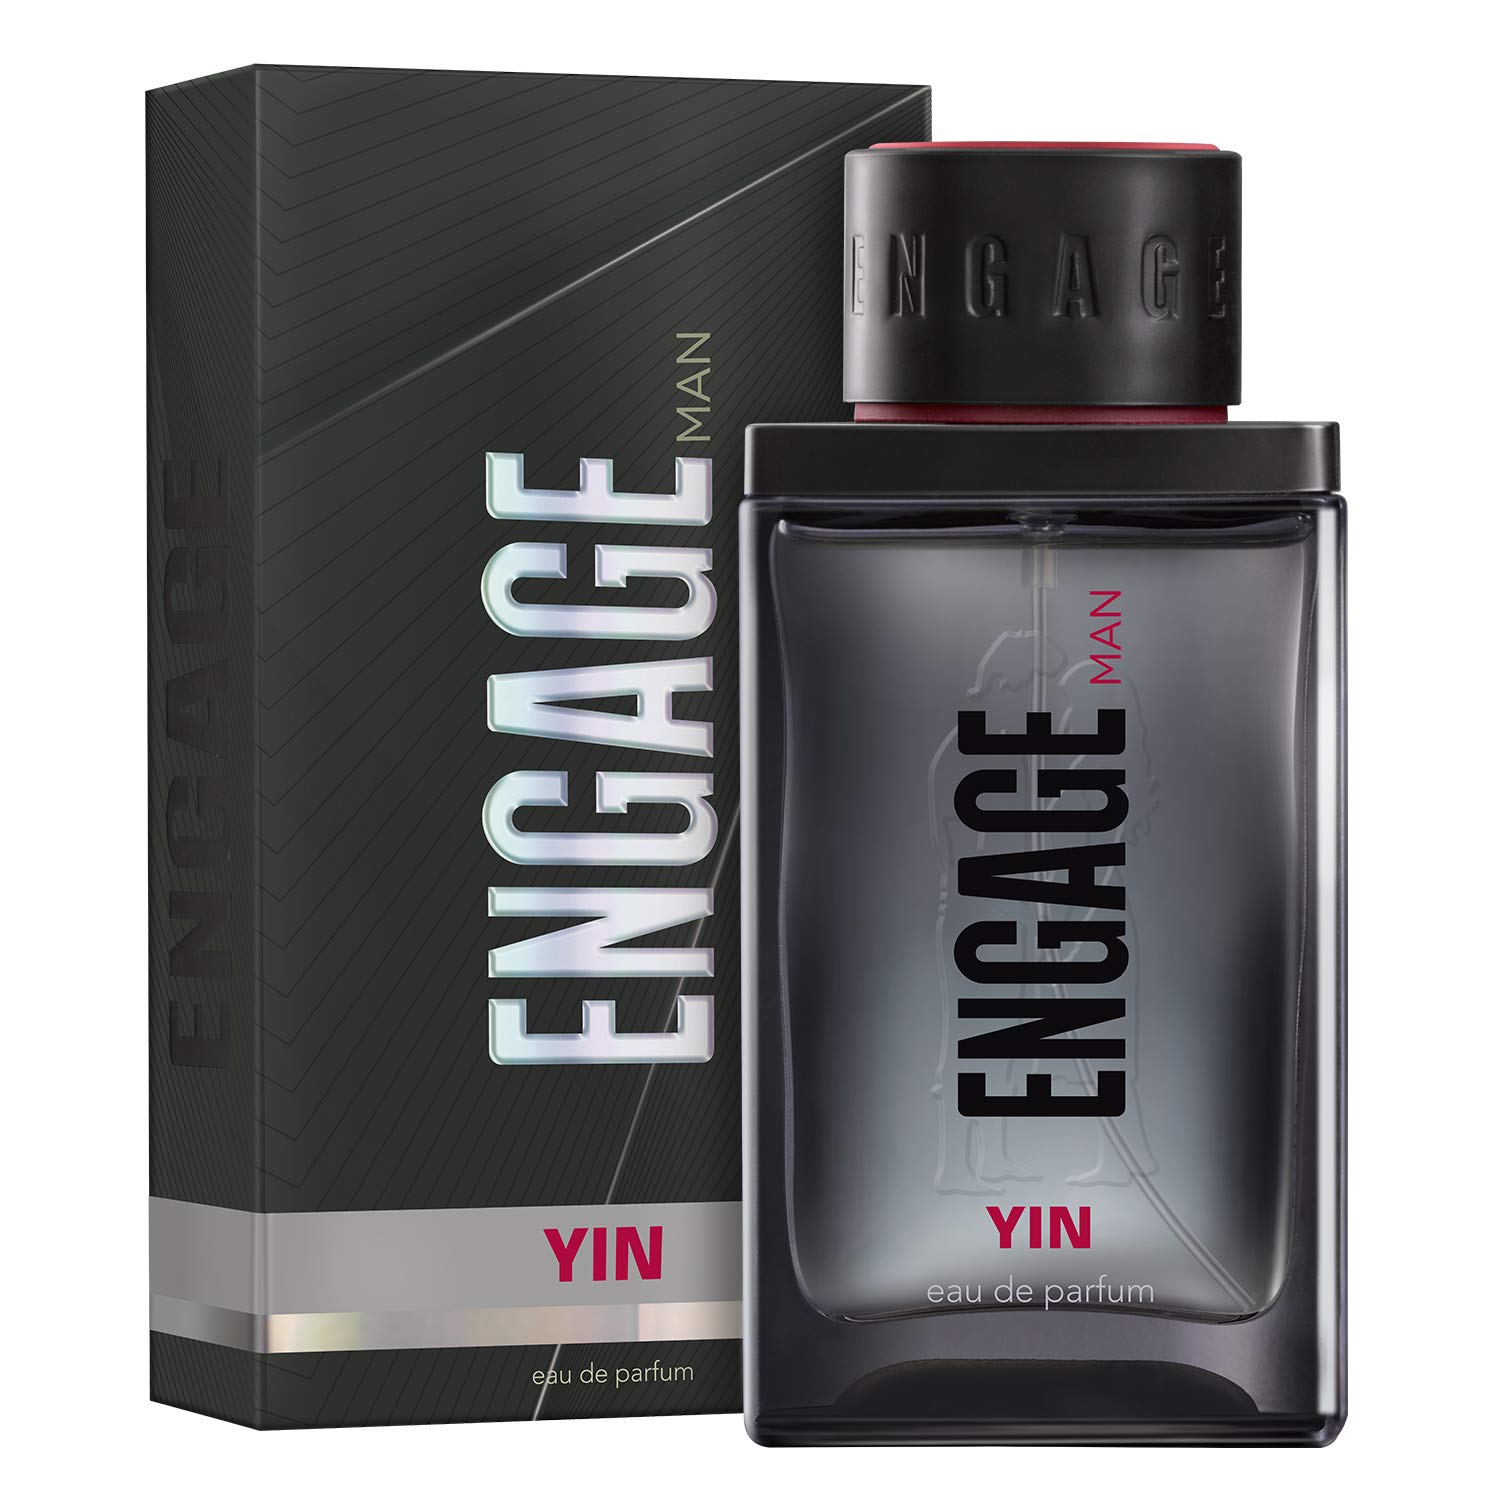 Engage perfume for Men